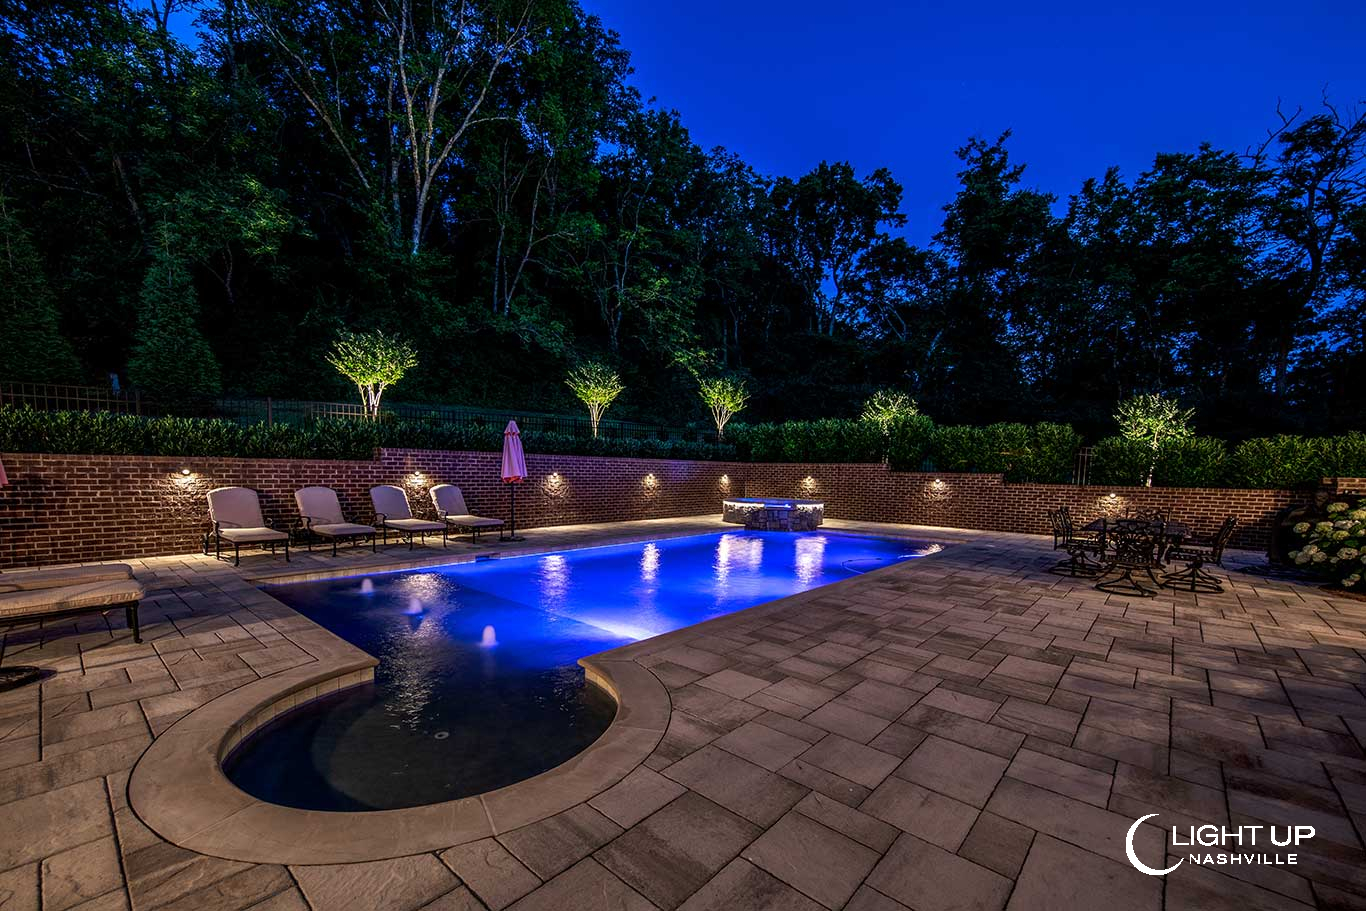 Extend Your Time outside with Outdoor Lighting Services